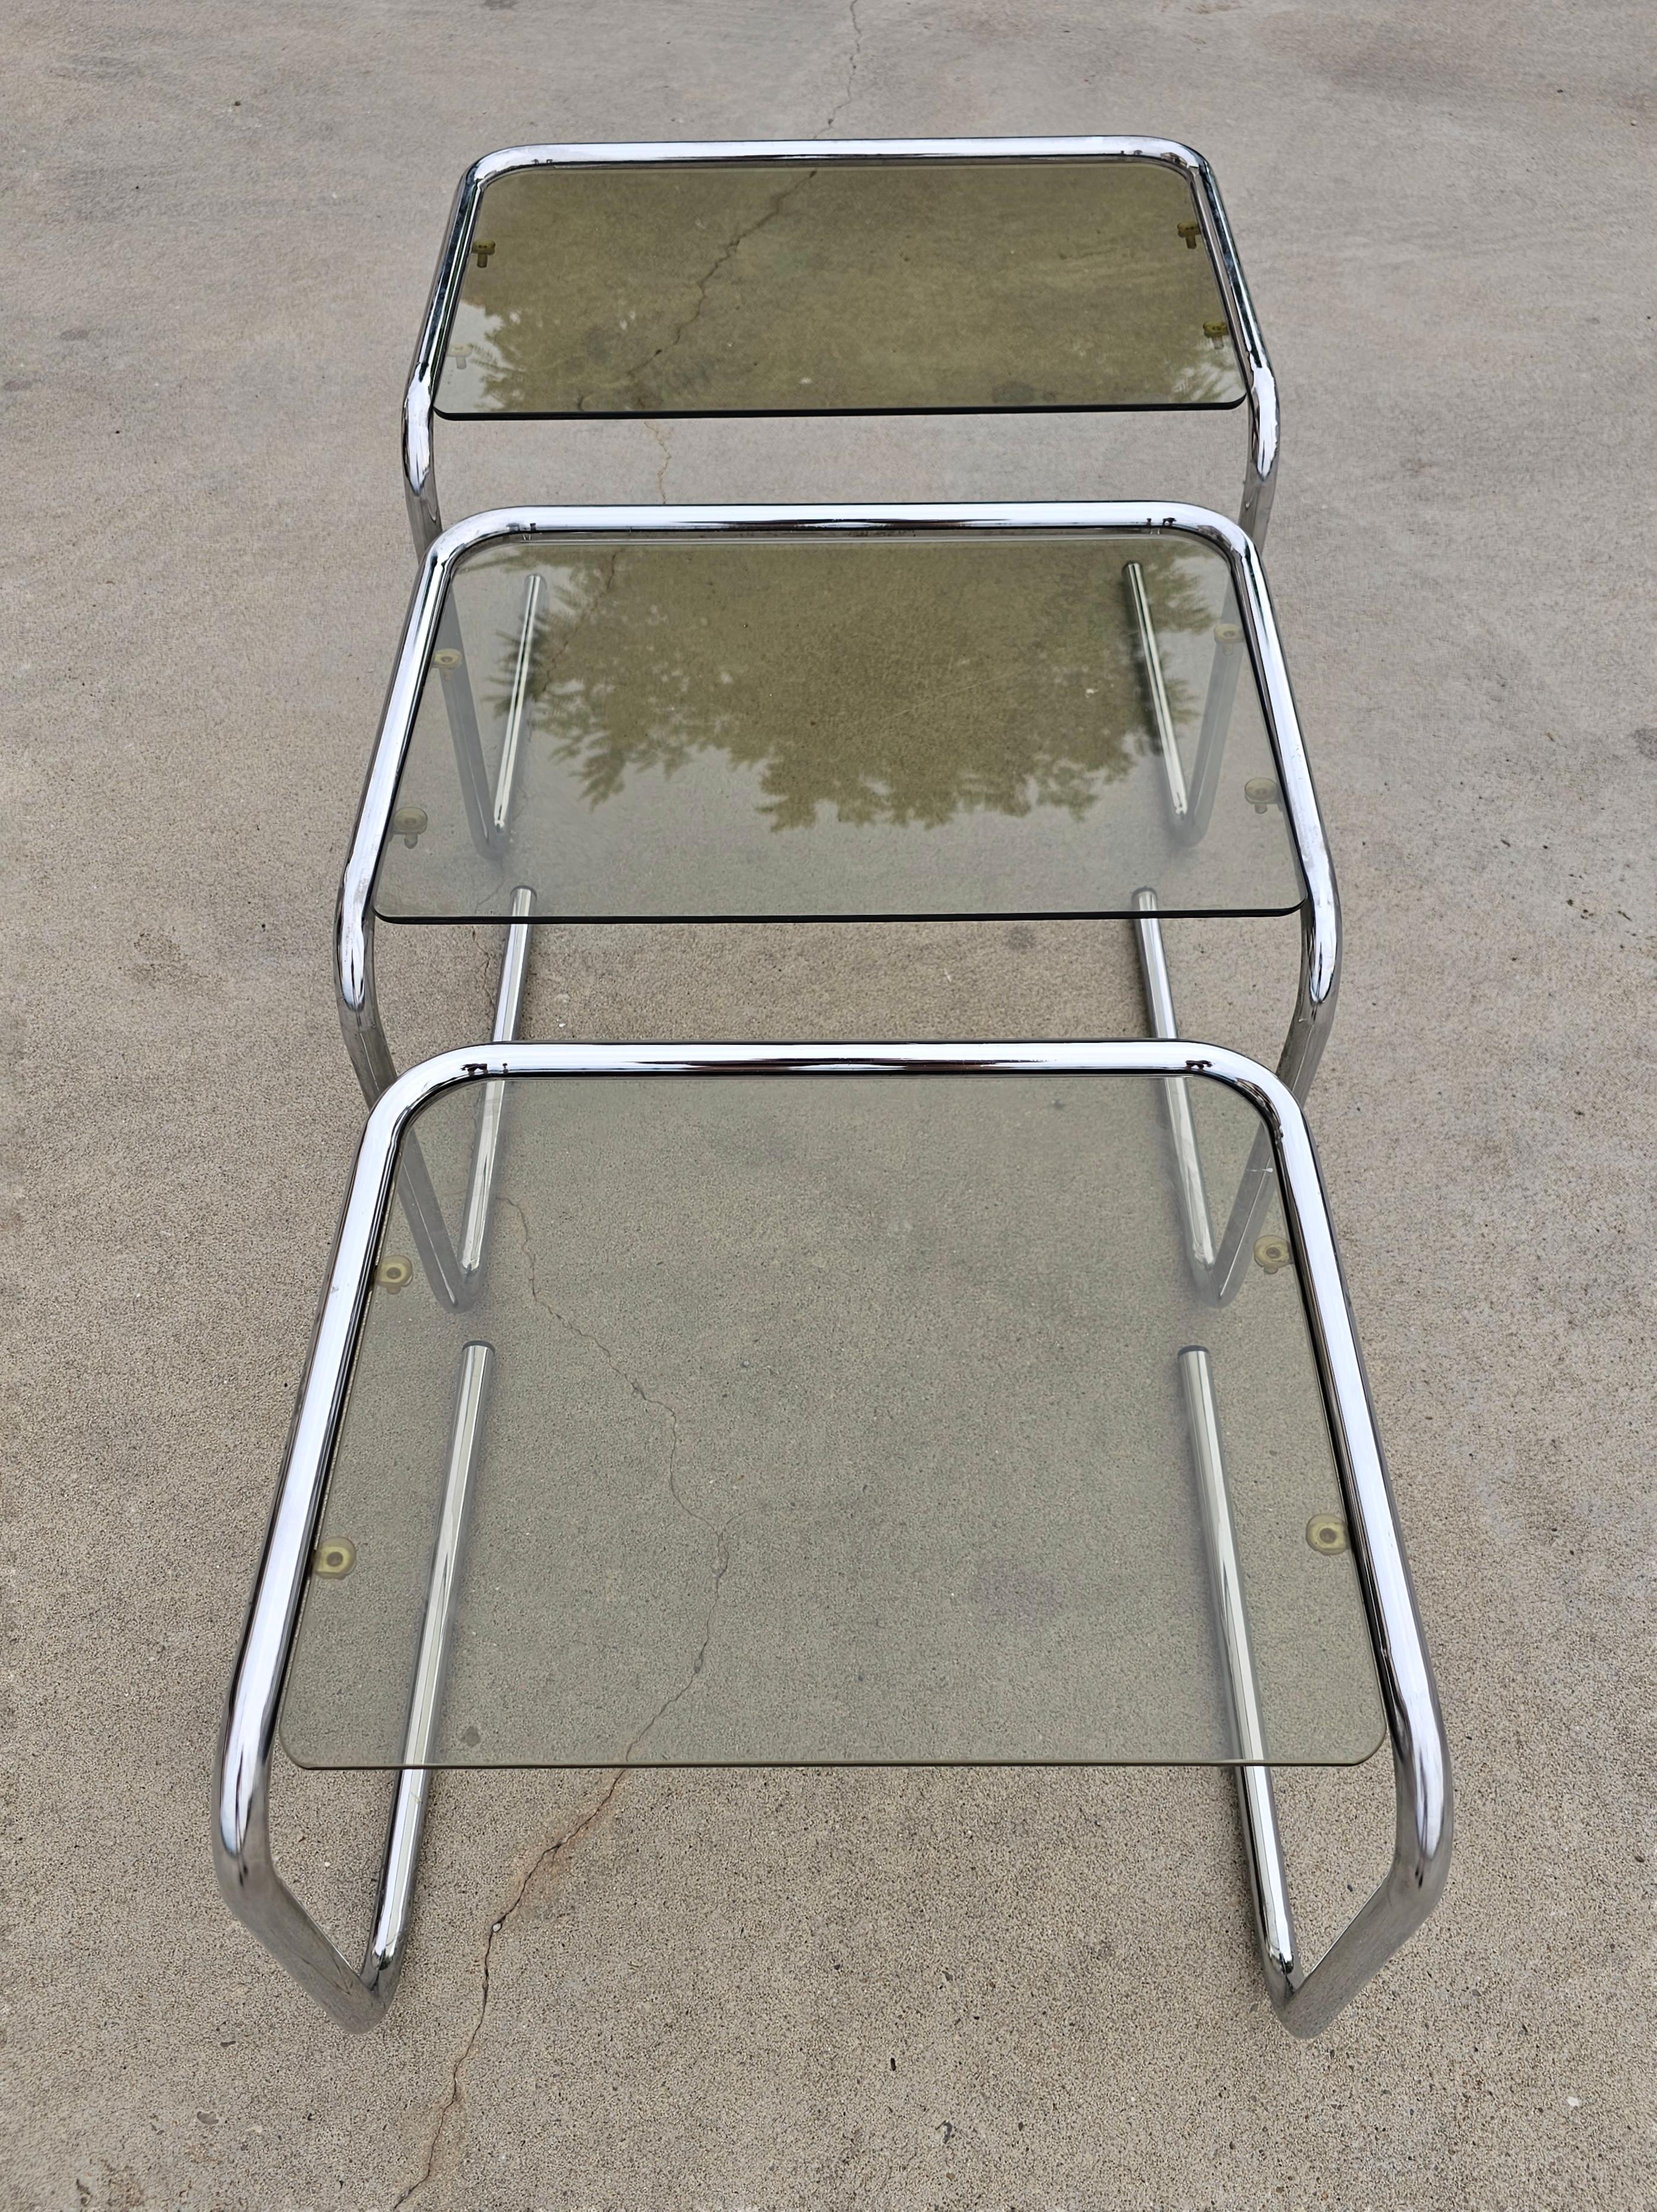 This listing features vintage set of 3 beautiful mid century modern chrome and smoked glass nesting tables attributed to Milo Baughman. Perfect for small apartments or corner areas in your home and very stylish and elegant. 

Italian sleek design